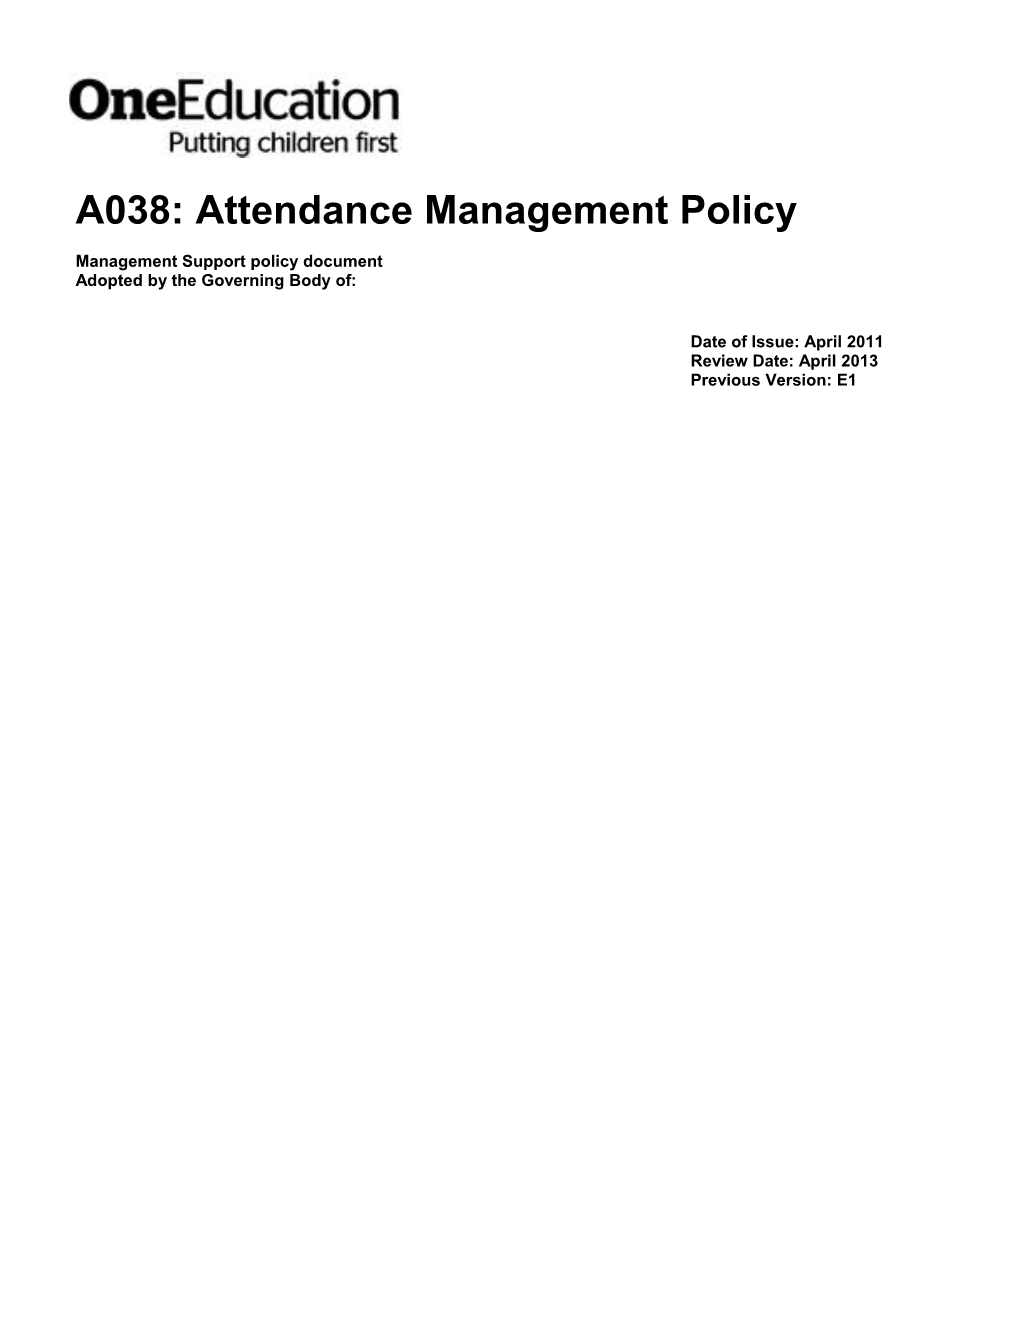 Management Support Policy Document